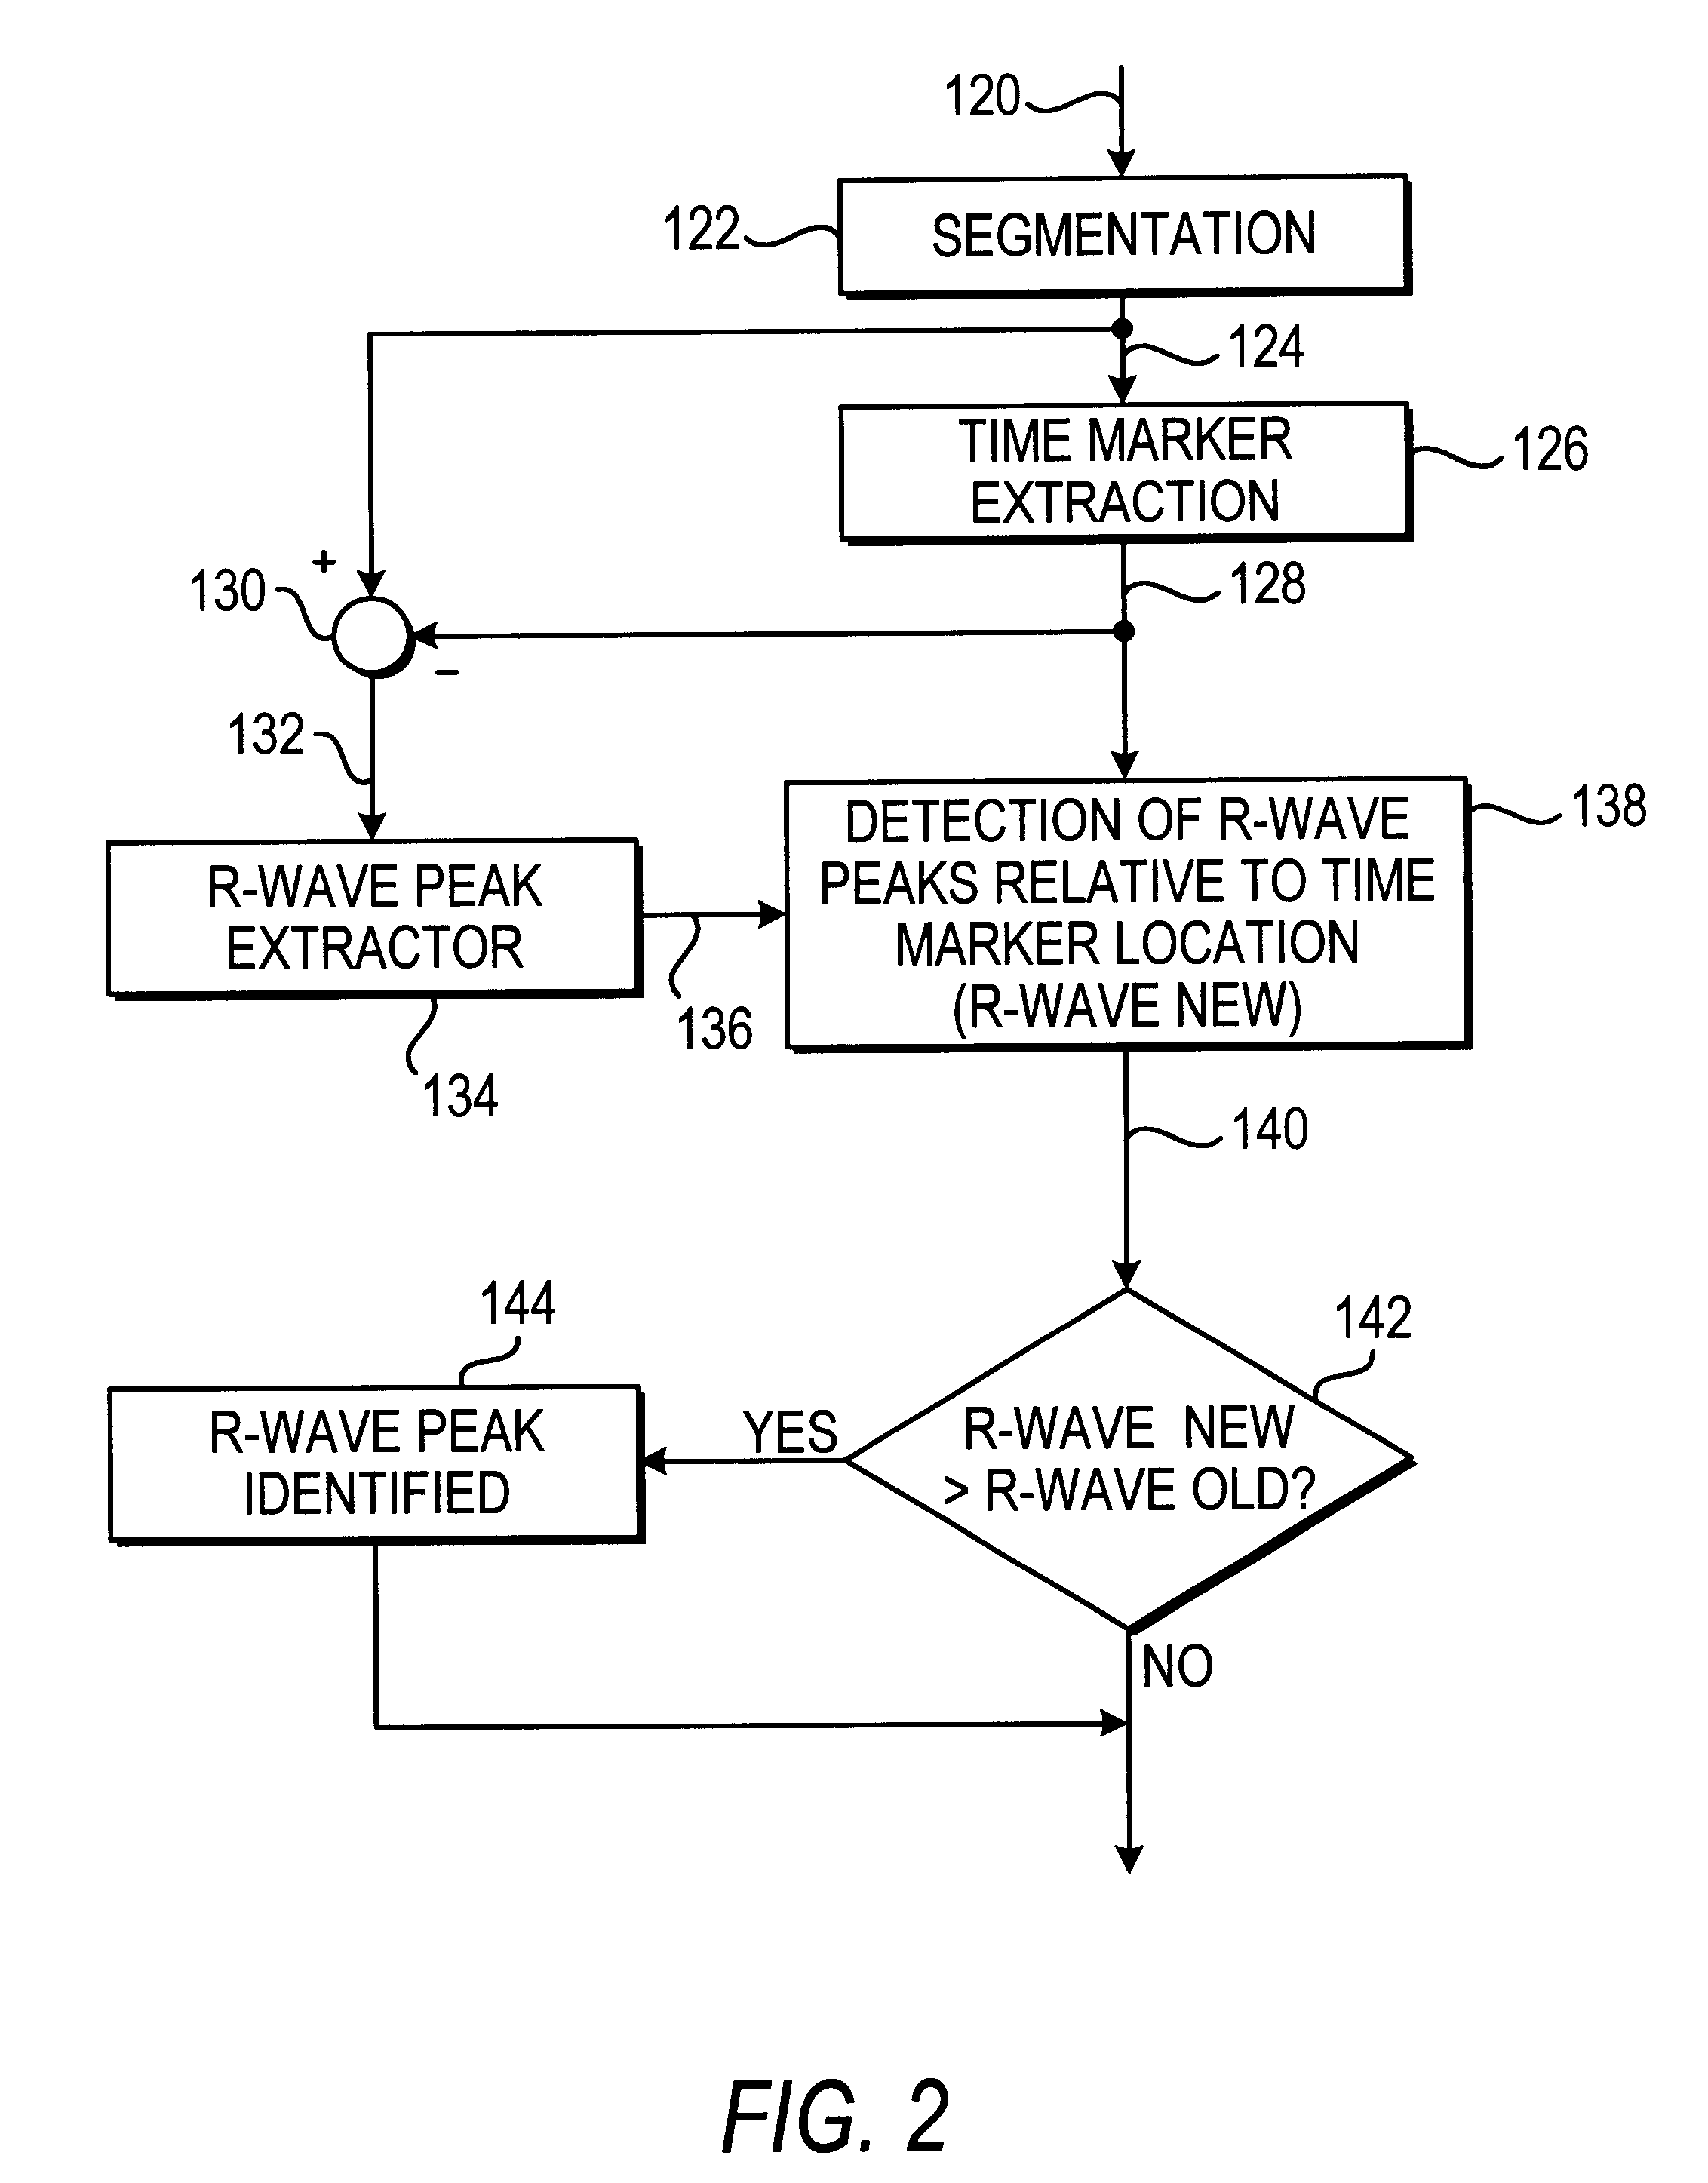 Method and apparatus for processing echocardiogram video images